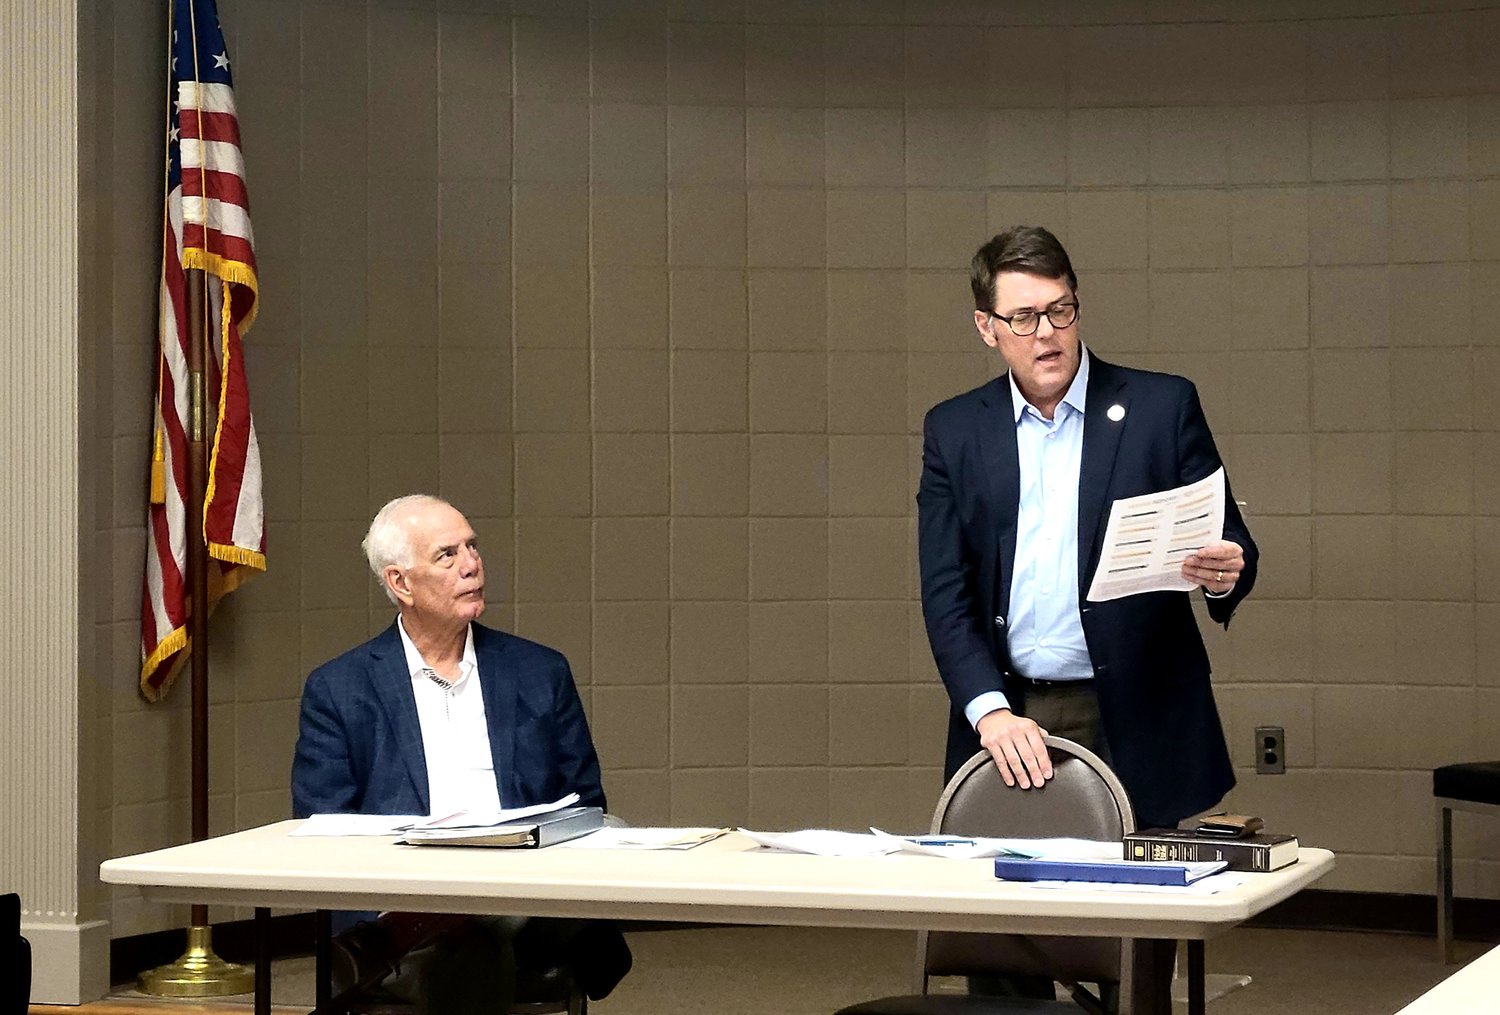 State Rep. Pat Marsh and State Sen. Shane Reeves at a Bedford County Republican Party forum last year.